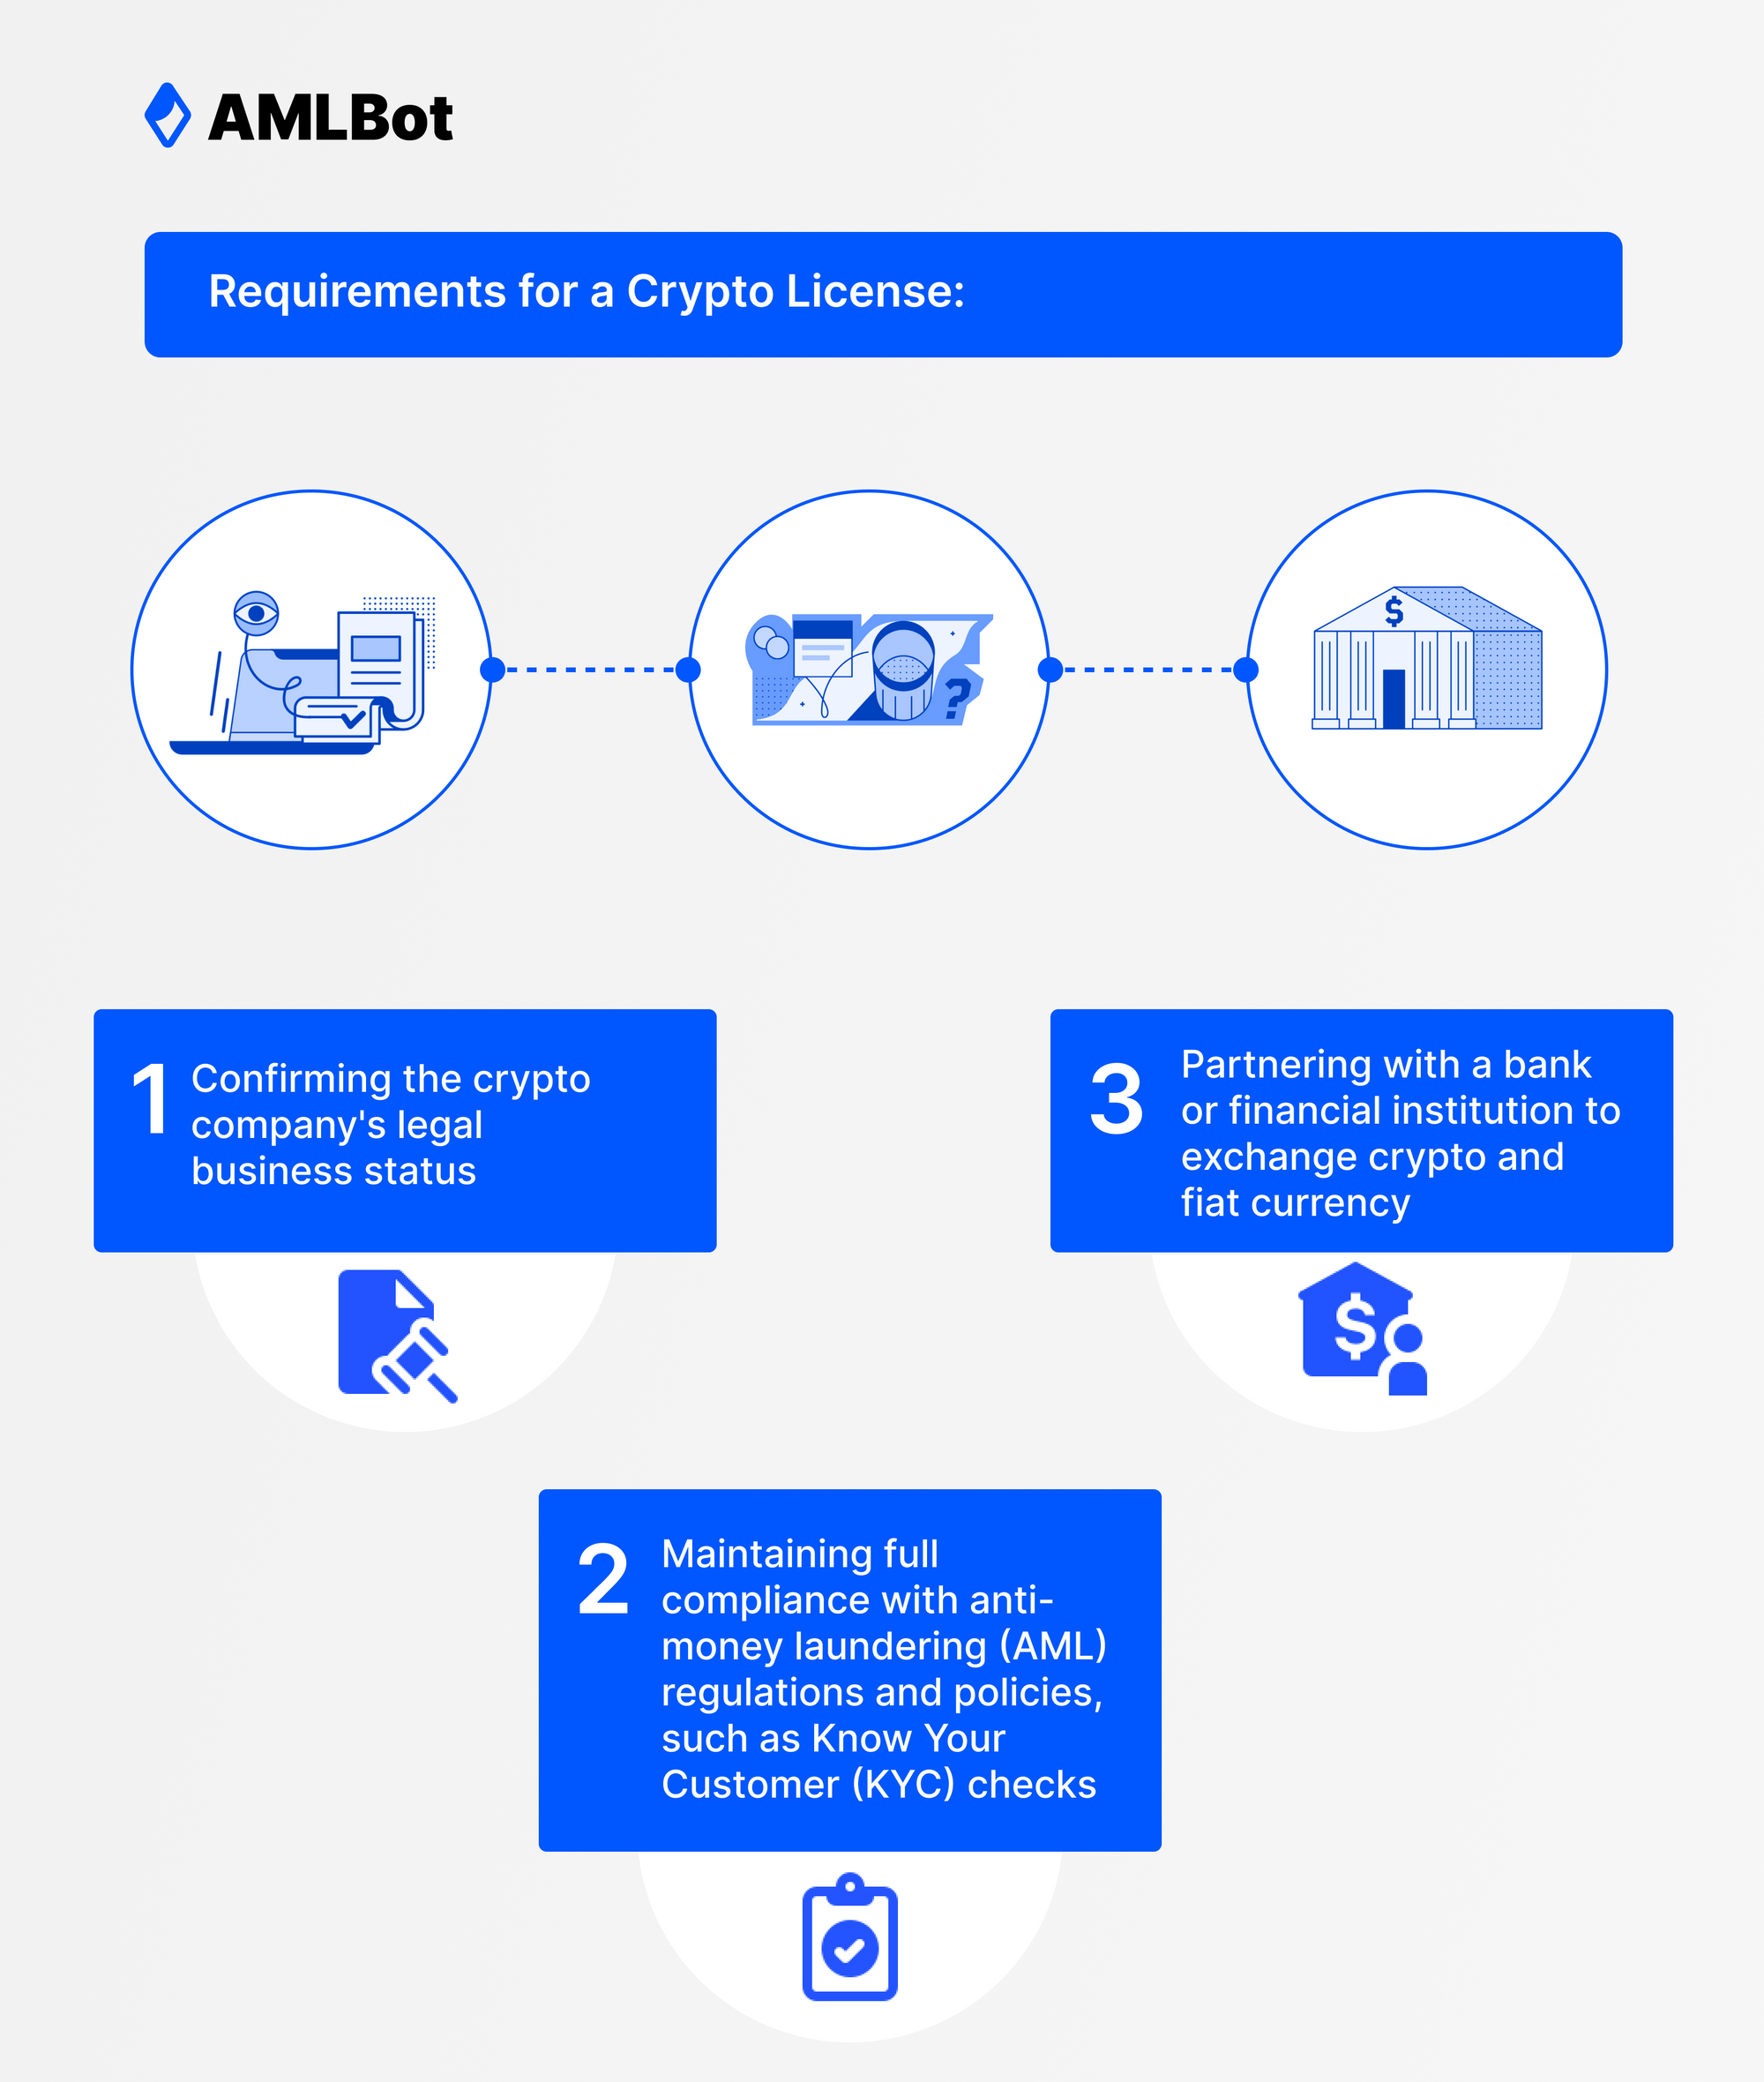 Requirements for a Crypto License